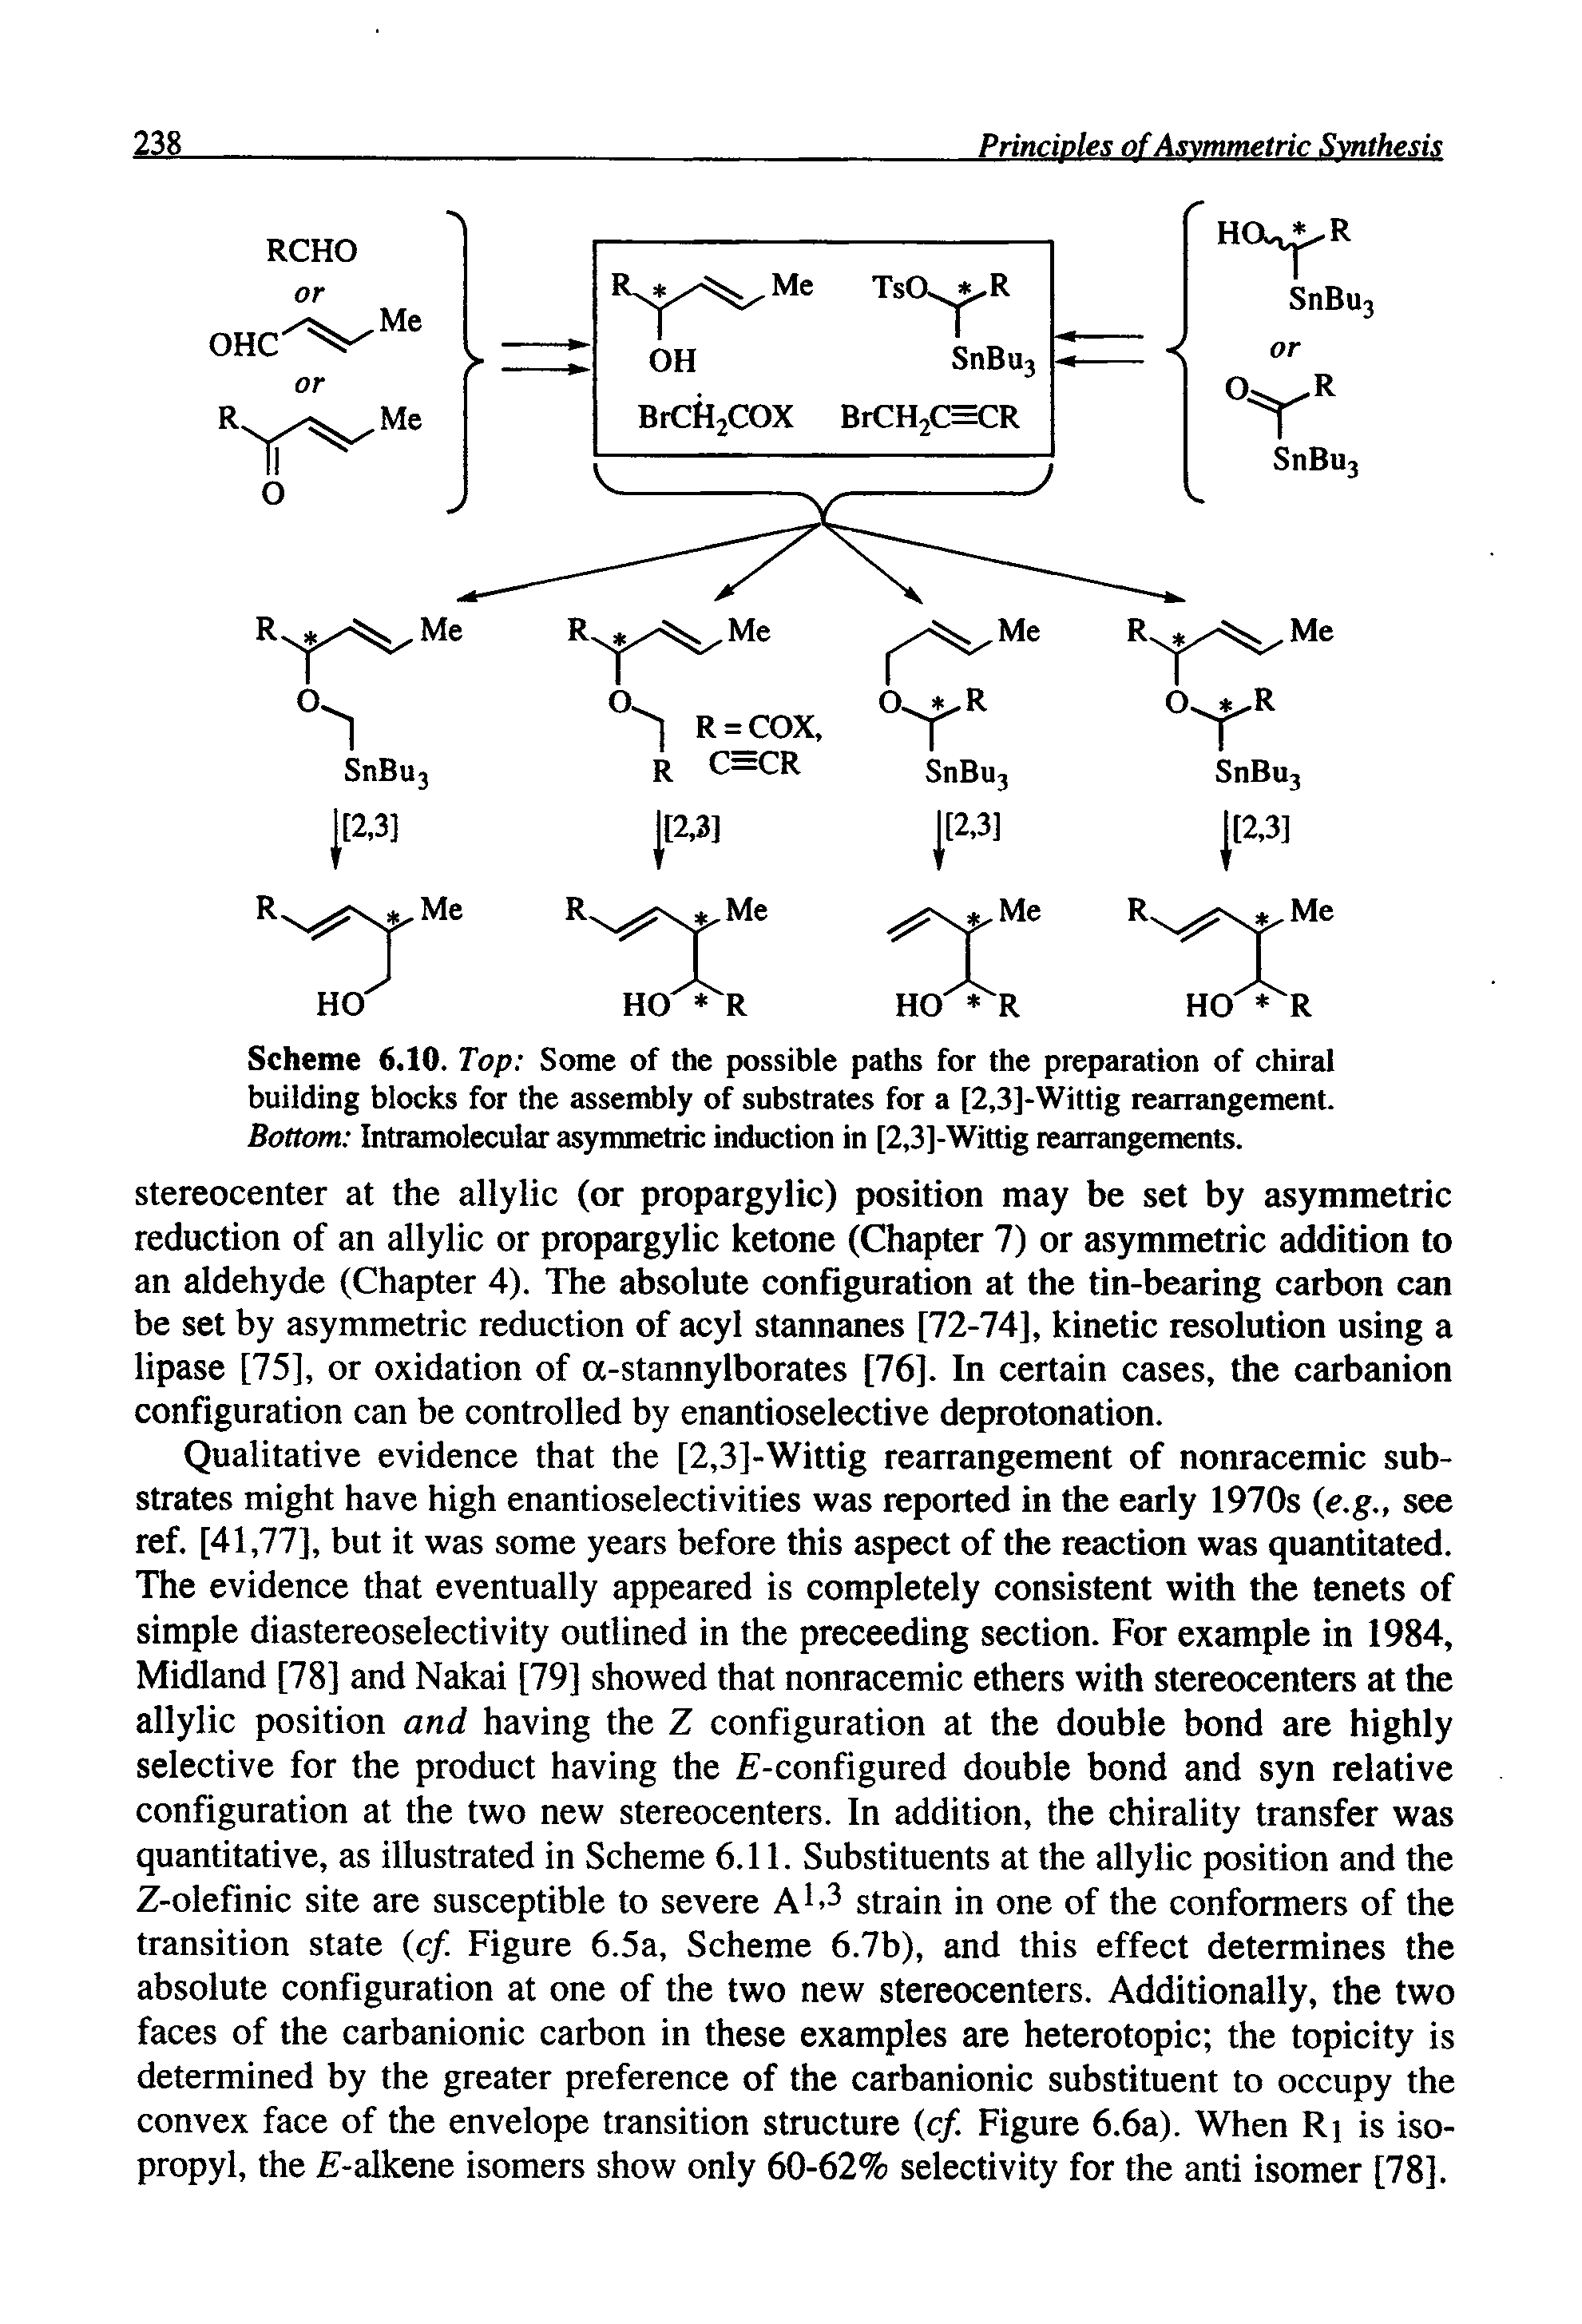 Scheme 6.10. Top Some of the possible paths for the preparation of chiral building blocks for the assembly of substrates for a [2,3]-Wittig rearrangement.